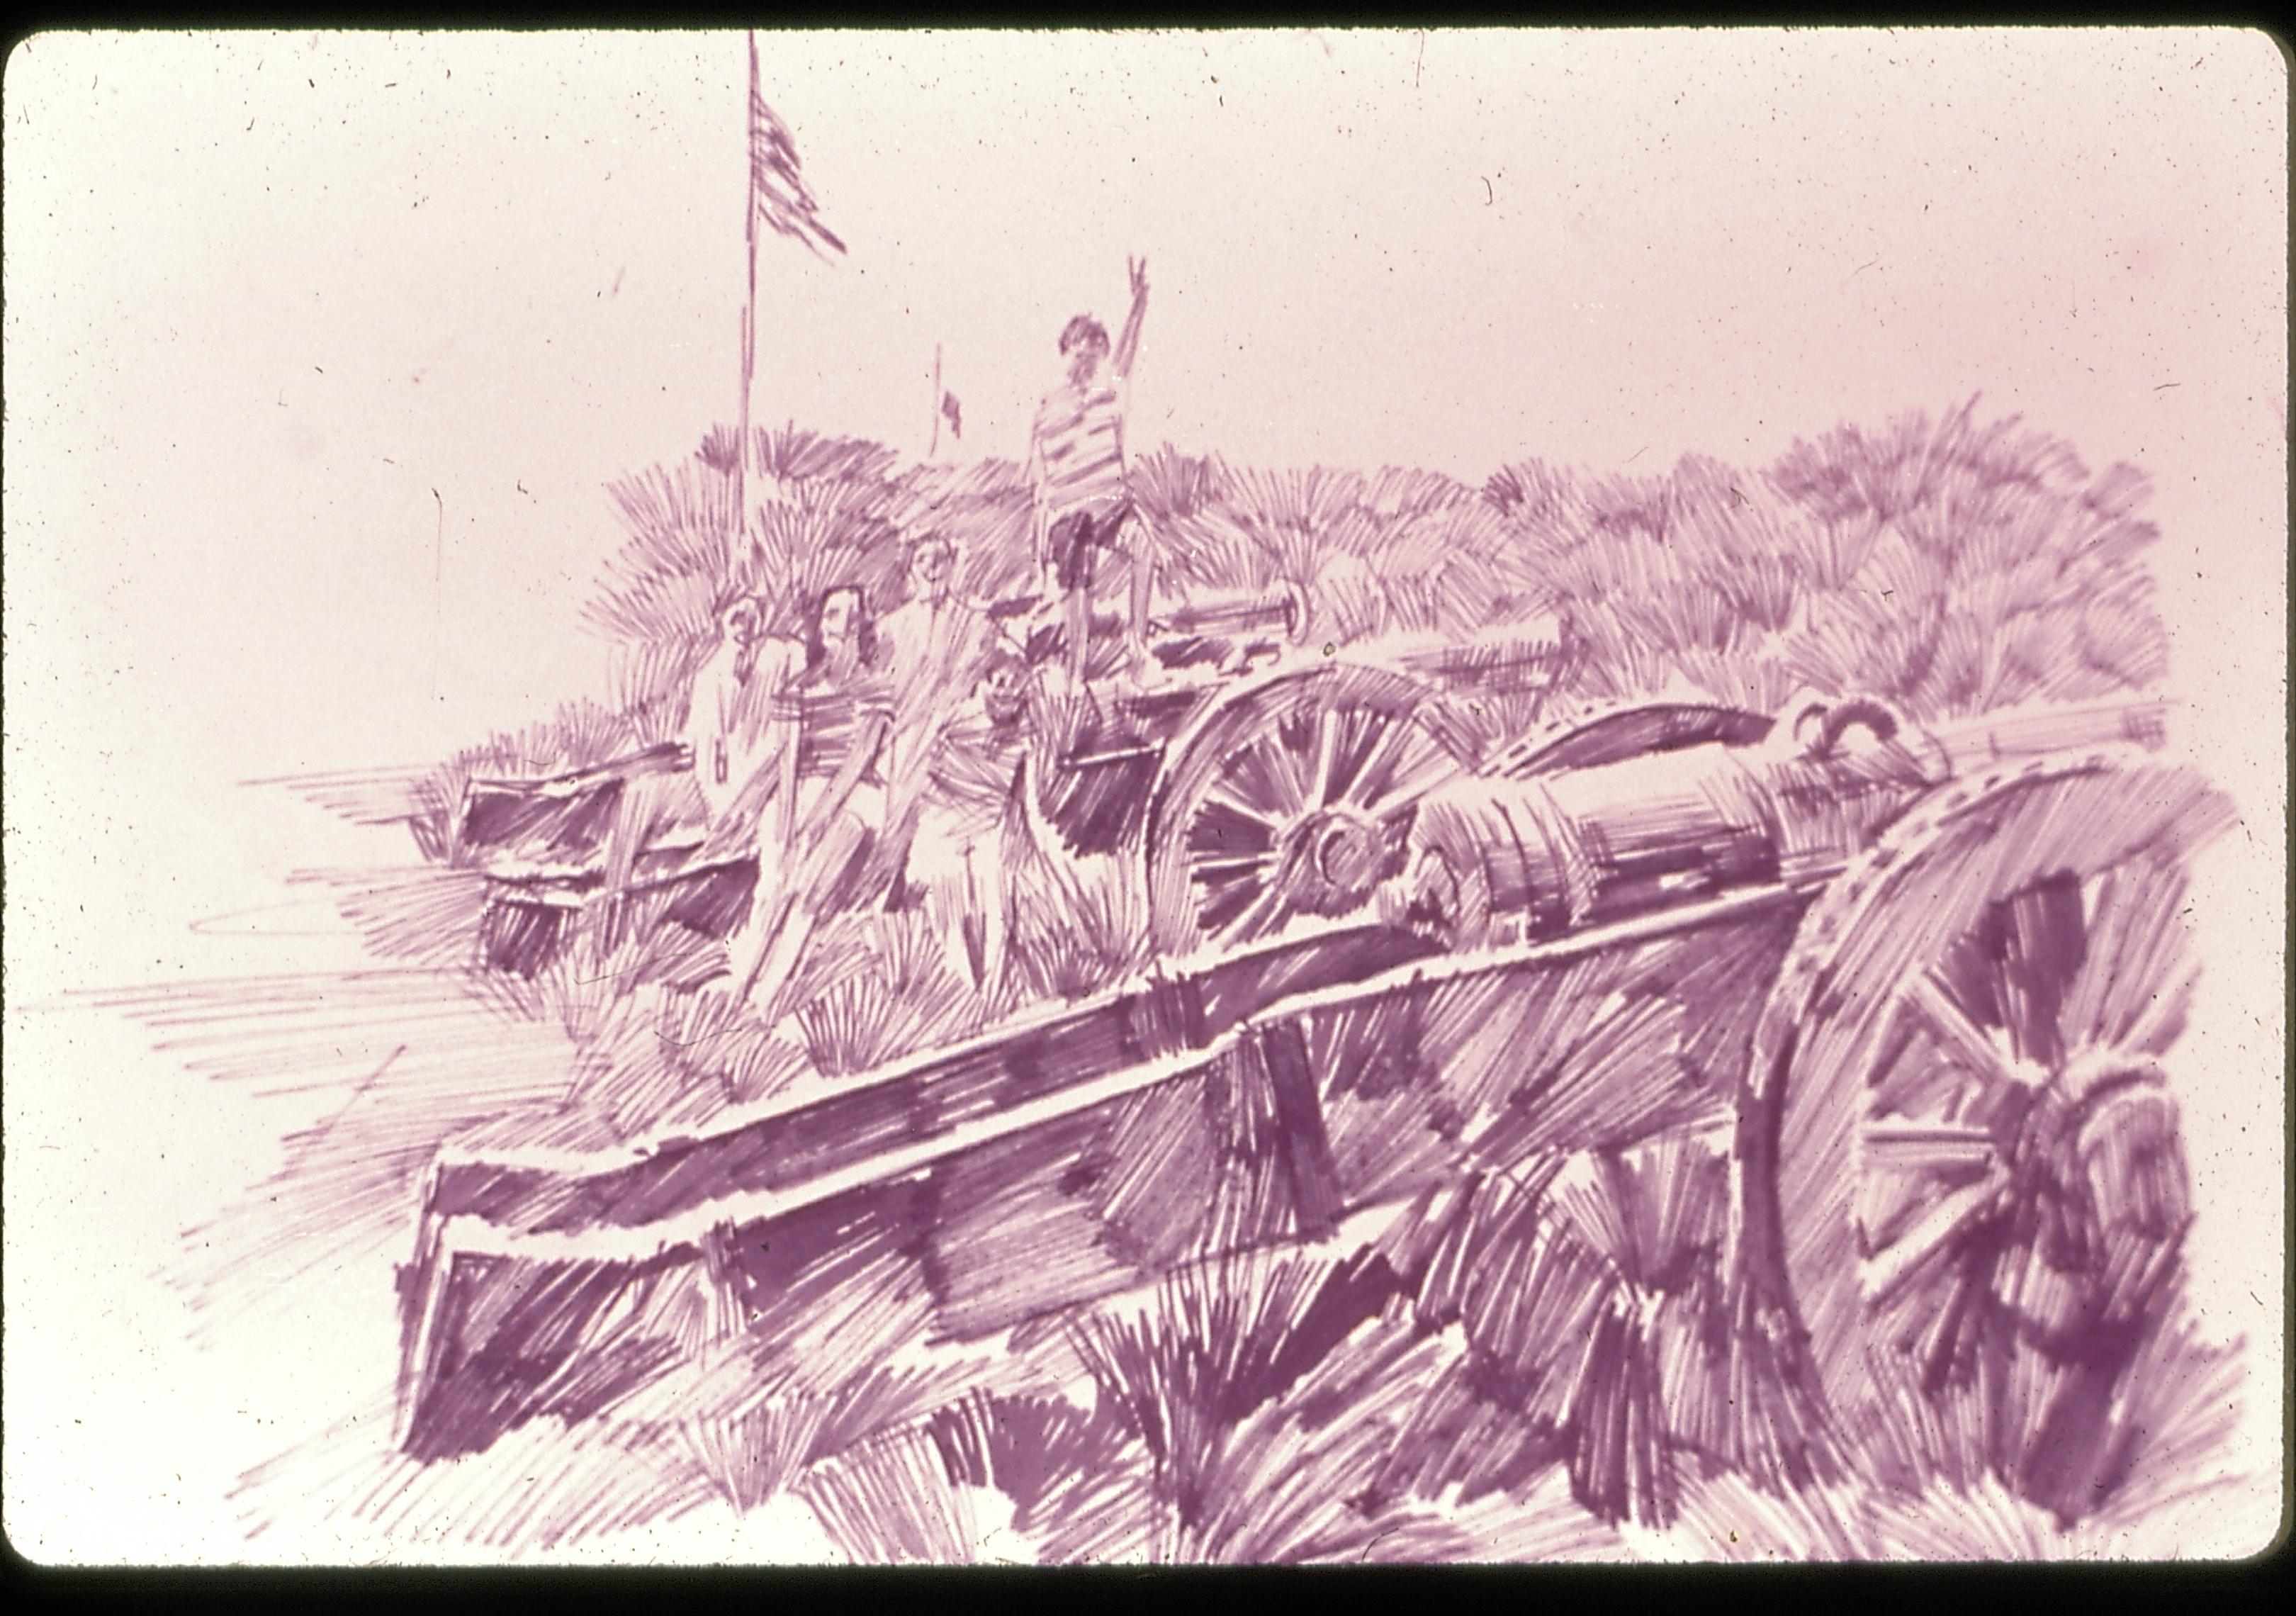 Lincoln Home NHS- Old Post Road, Bicentennial Slide Show, 1 slide, Bicentennial, cannon, family, flag, drawing